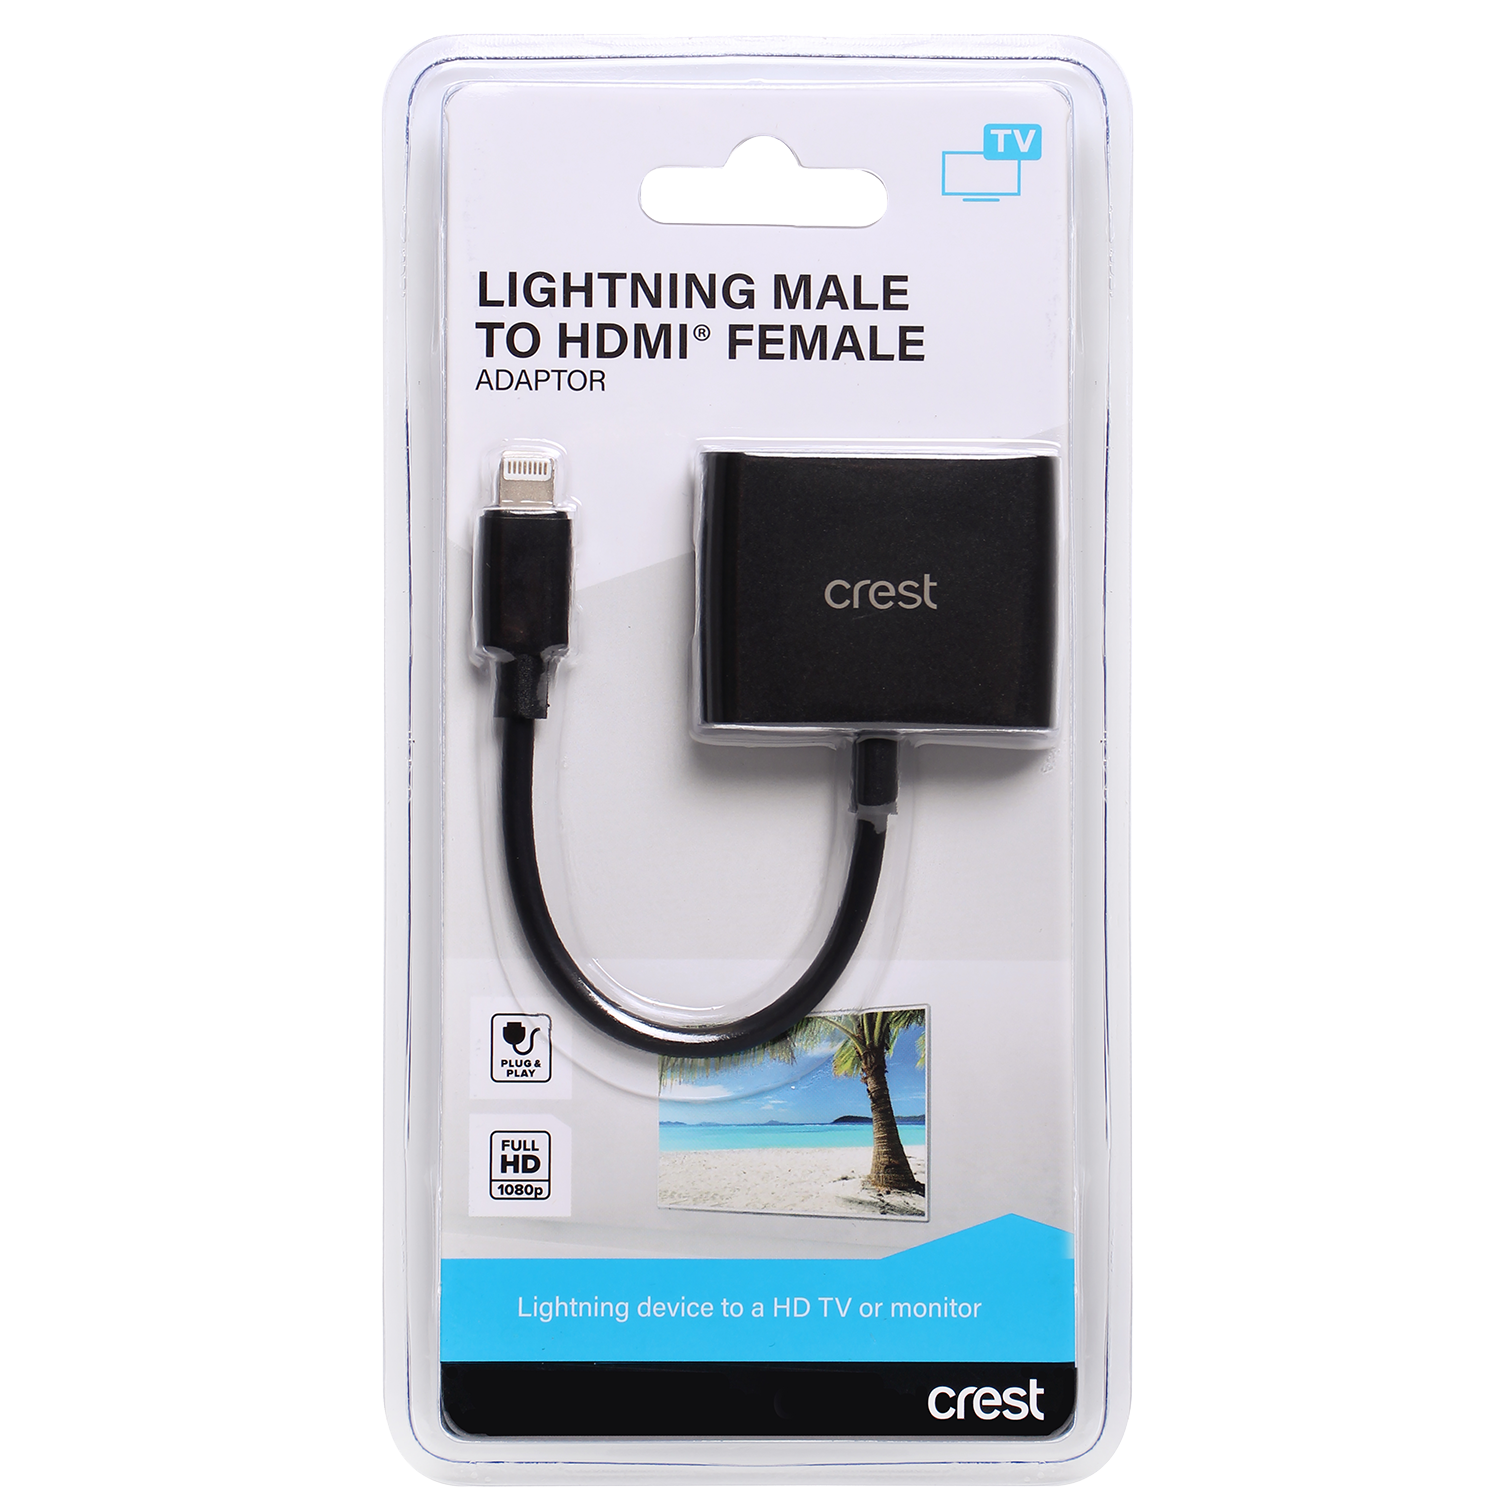 Lightning Male To HDMI Female